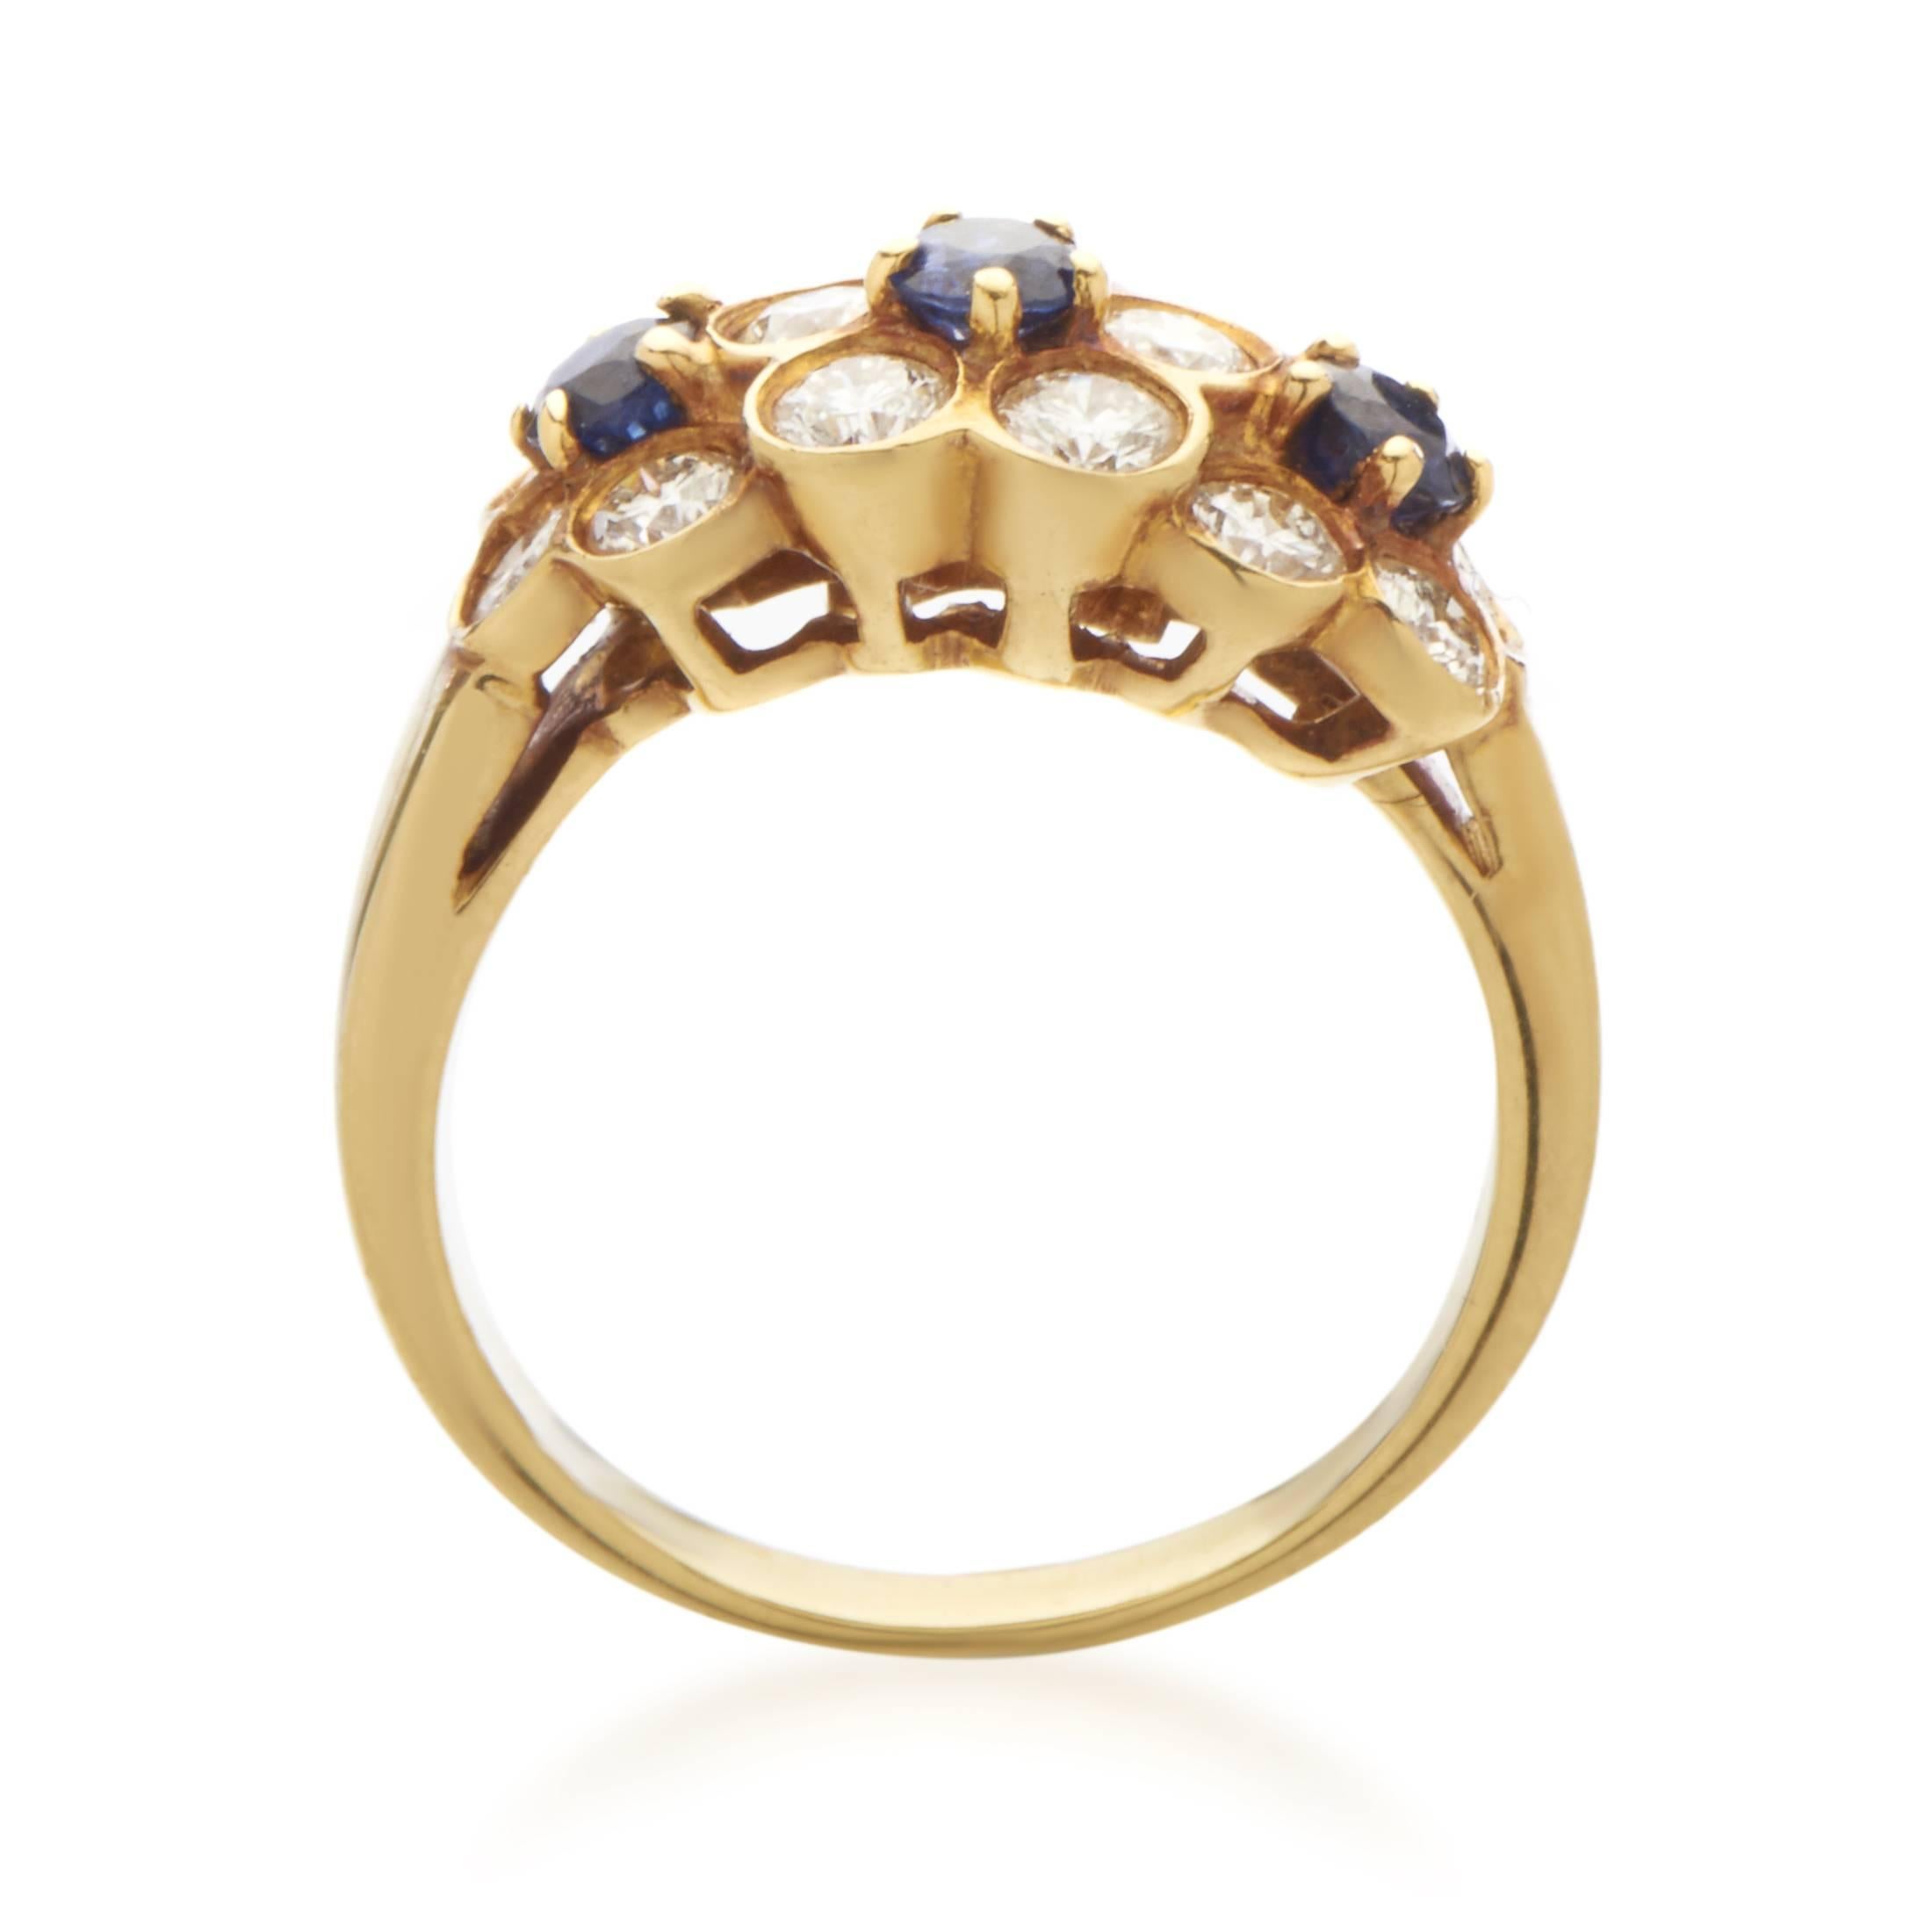 Arranged in a seemingly chaotic manner and tastefully combined on top of this magnificent 18K yellow gold ring from Van Cleef & Arpels, the resplendent diamonds totaling 0.70ct and splendid sapphires amounting to 0.30ct create a fantastic